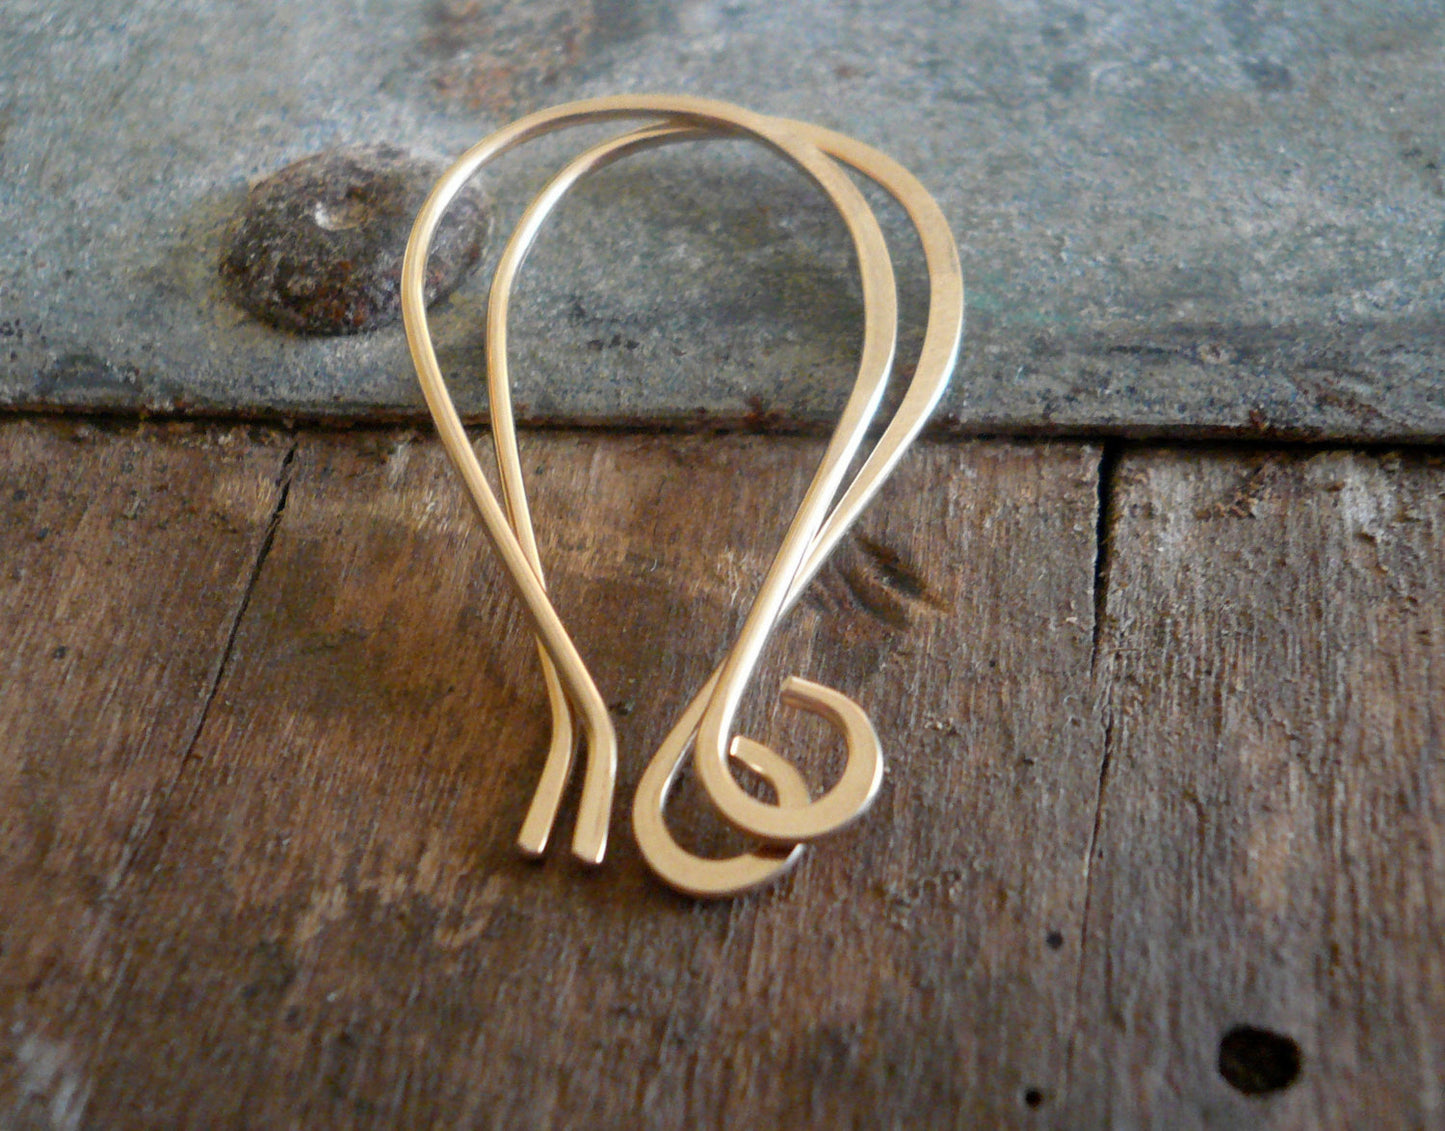 Sway 14kt Yellow or Rose Goldfill Earwires - Handmade. Handforged. Made to Order